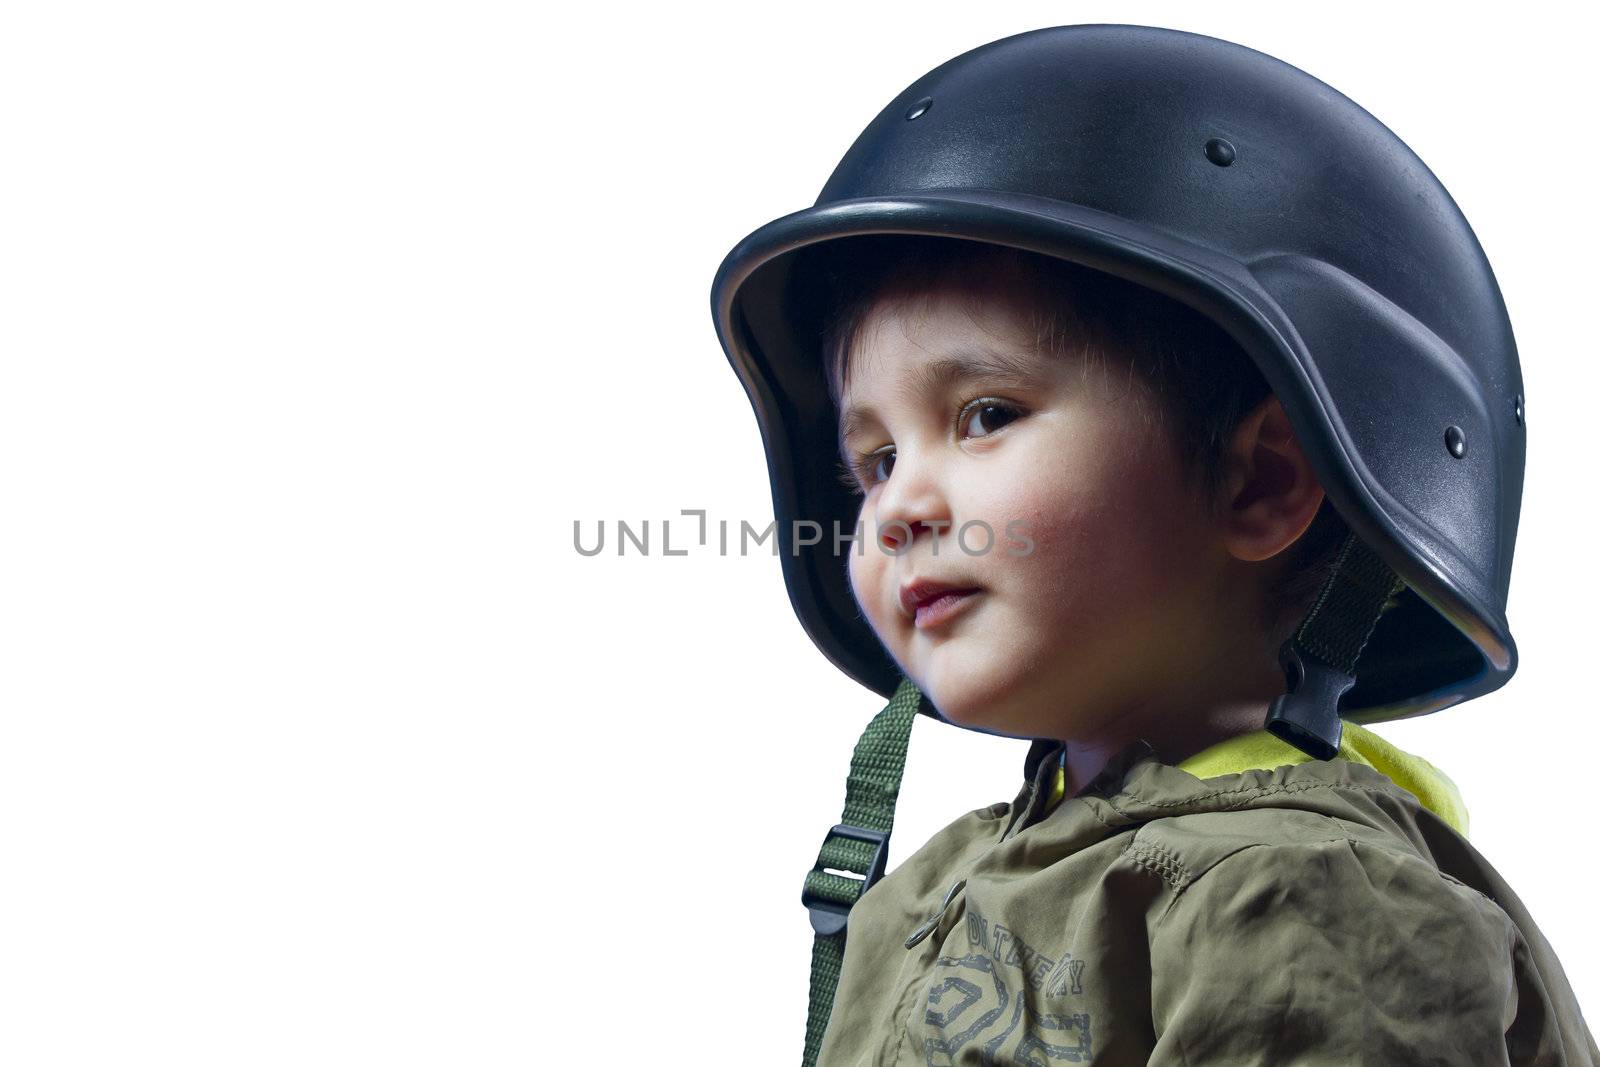 Baby playing war with military helmet by FernandoCortes